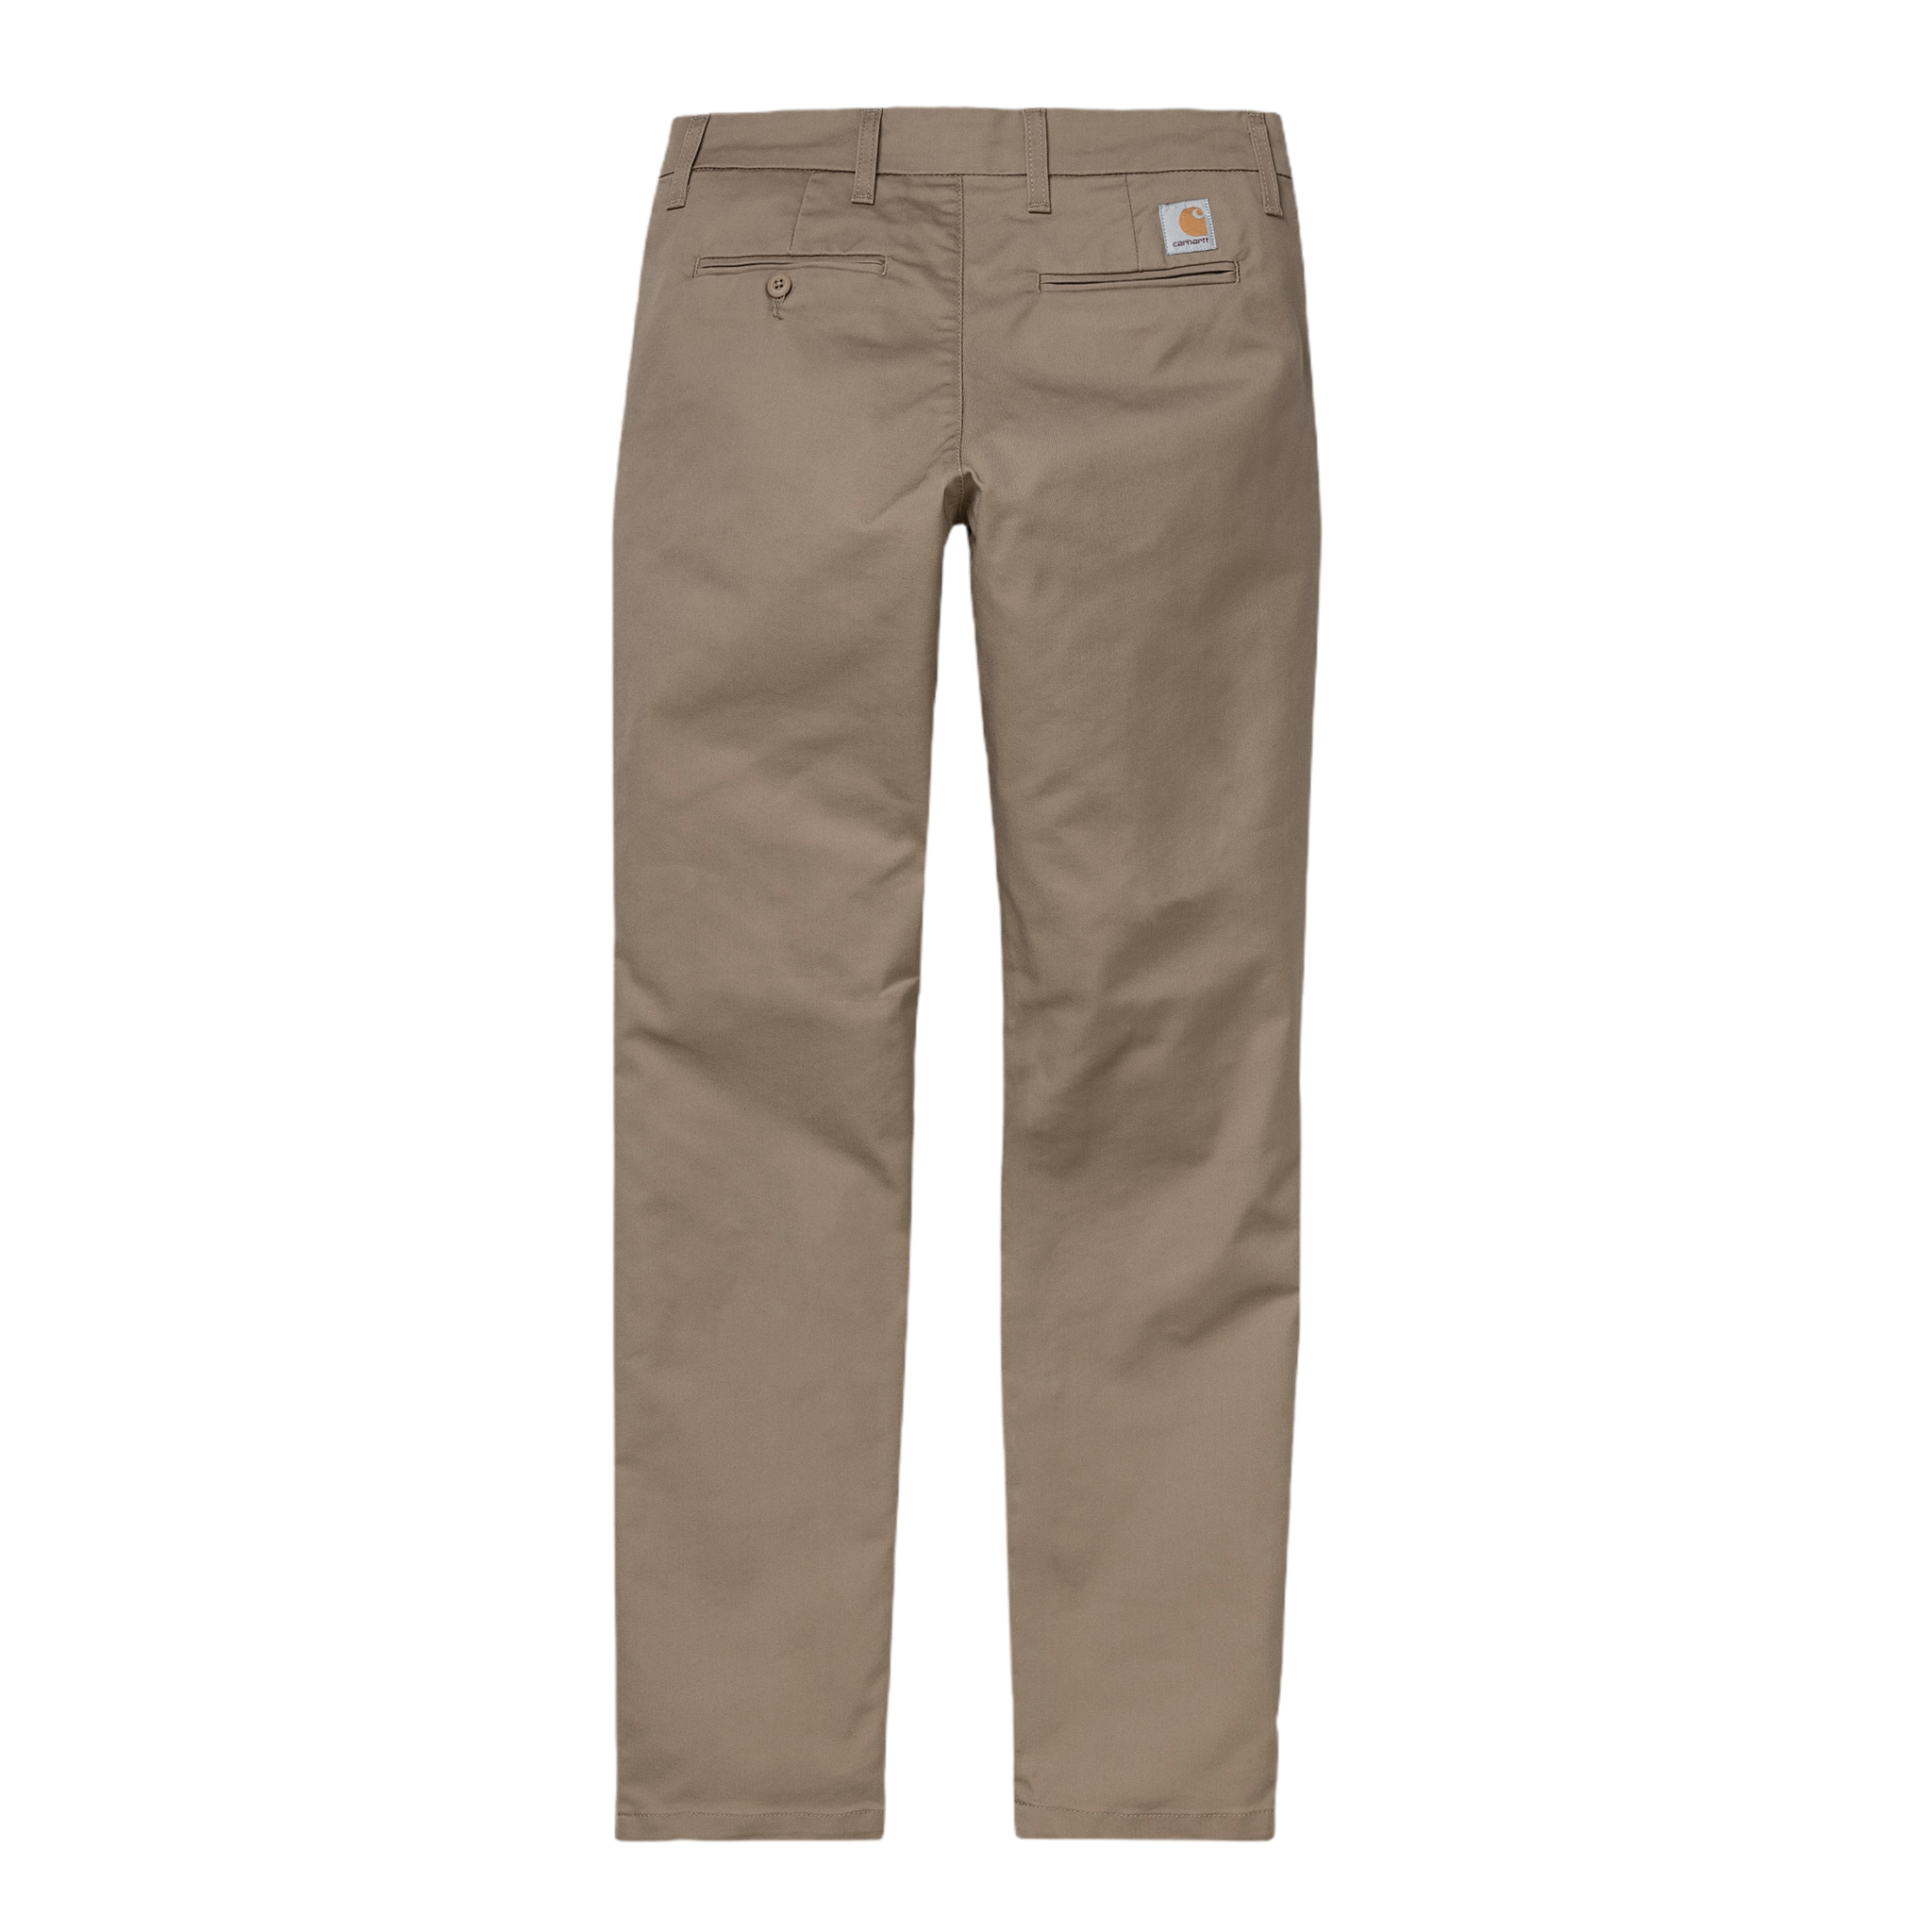 Carhartt Sid Pant - Leather Rinsed